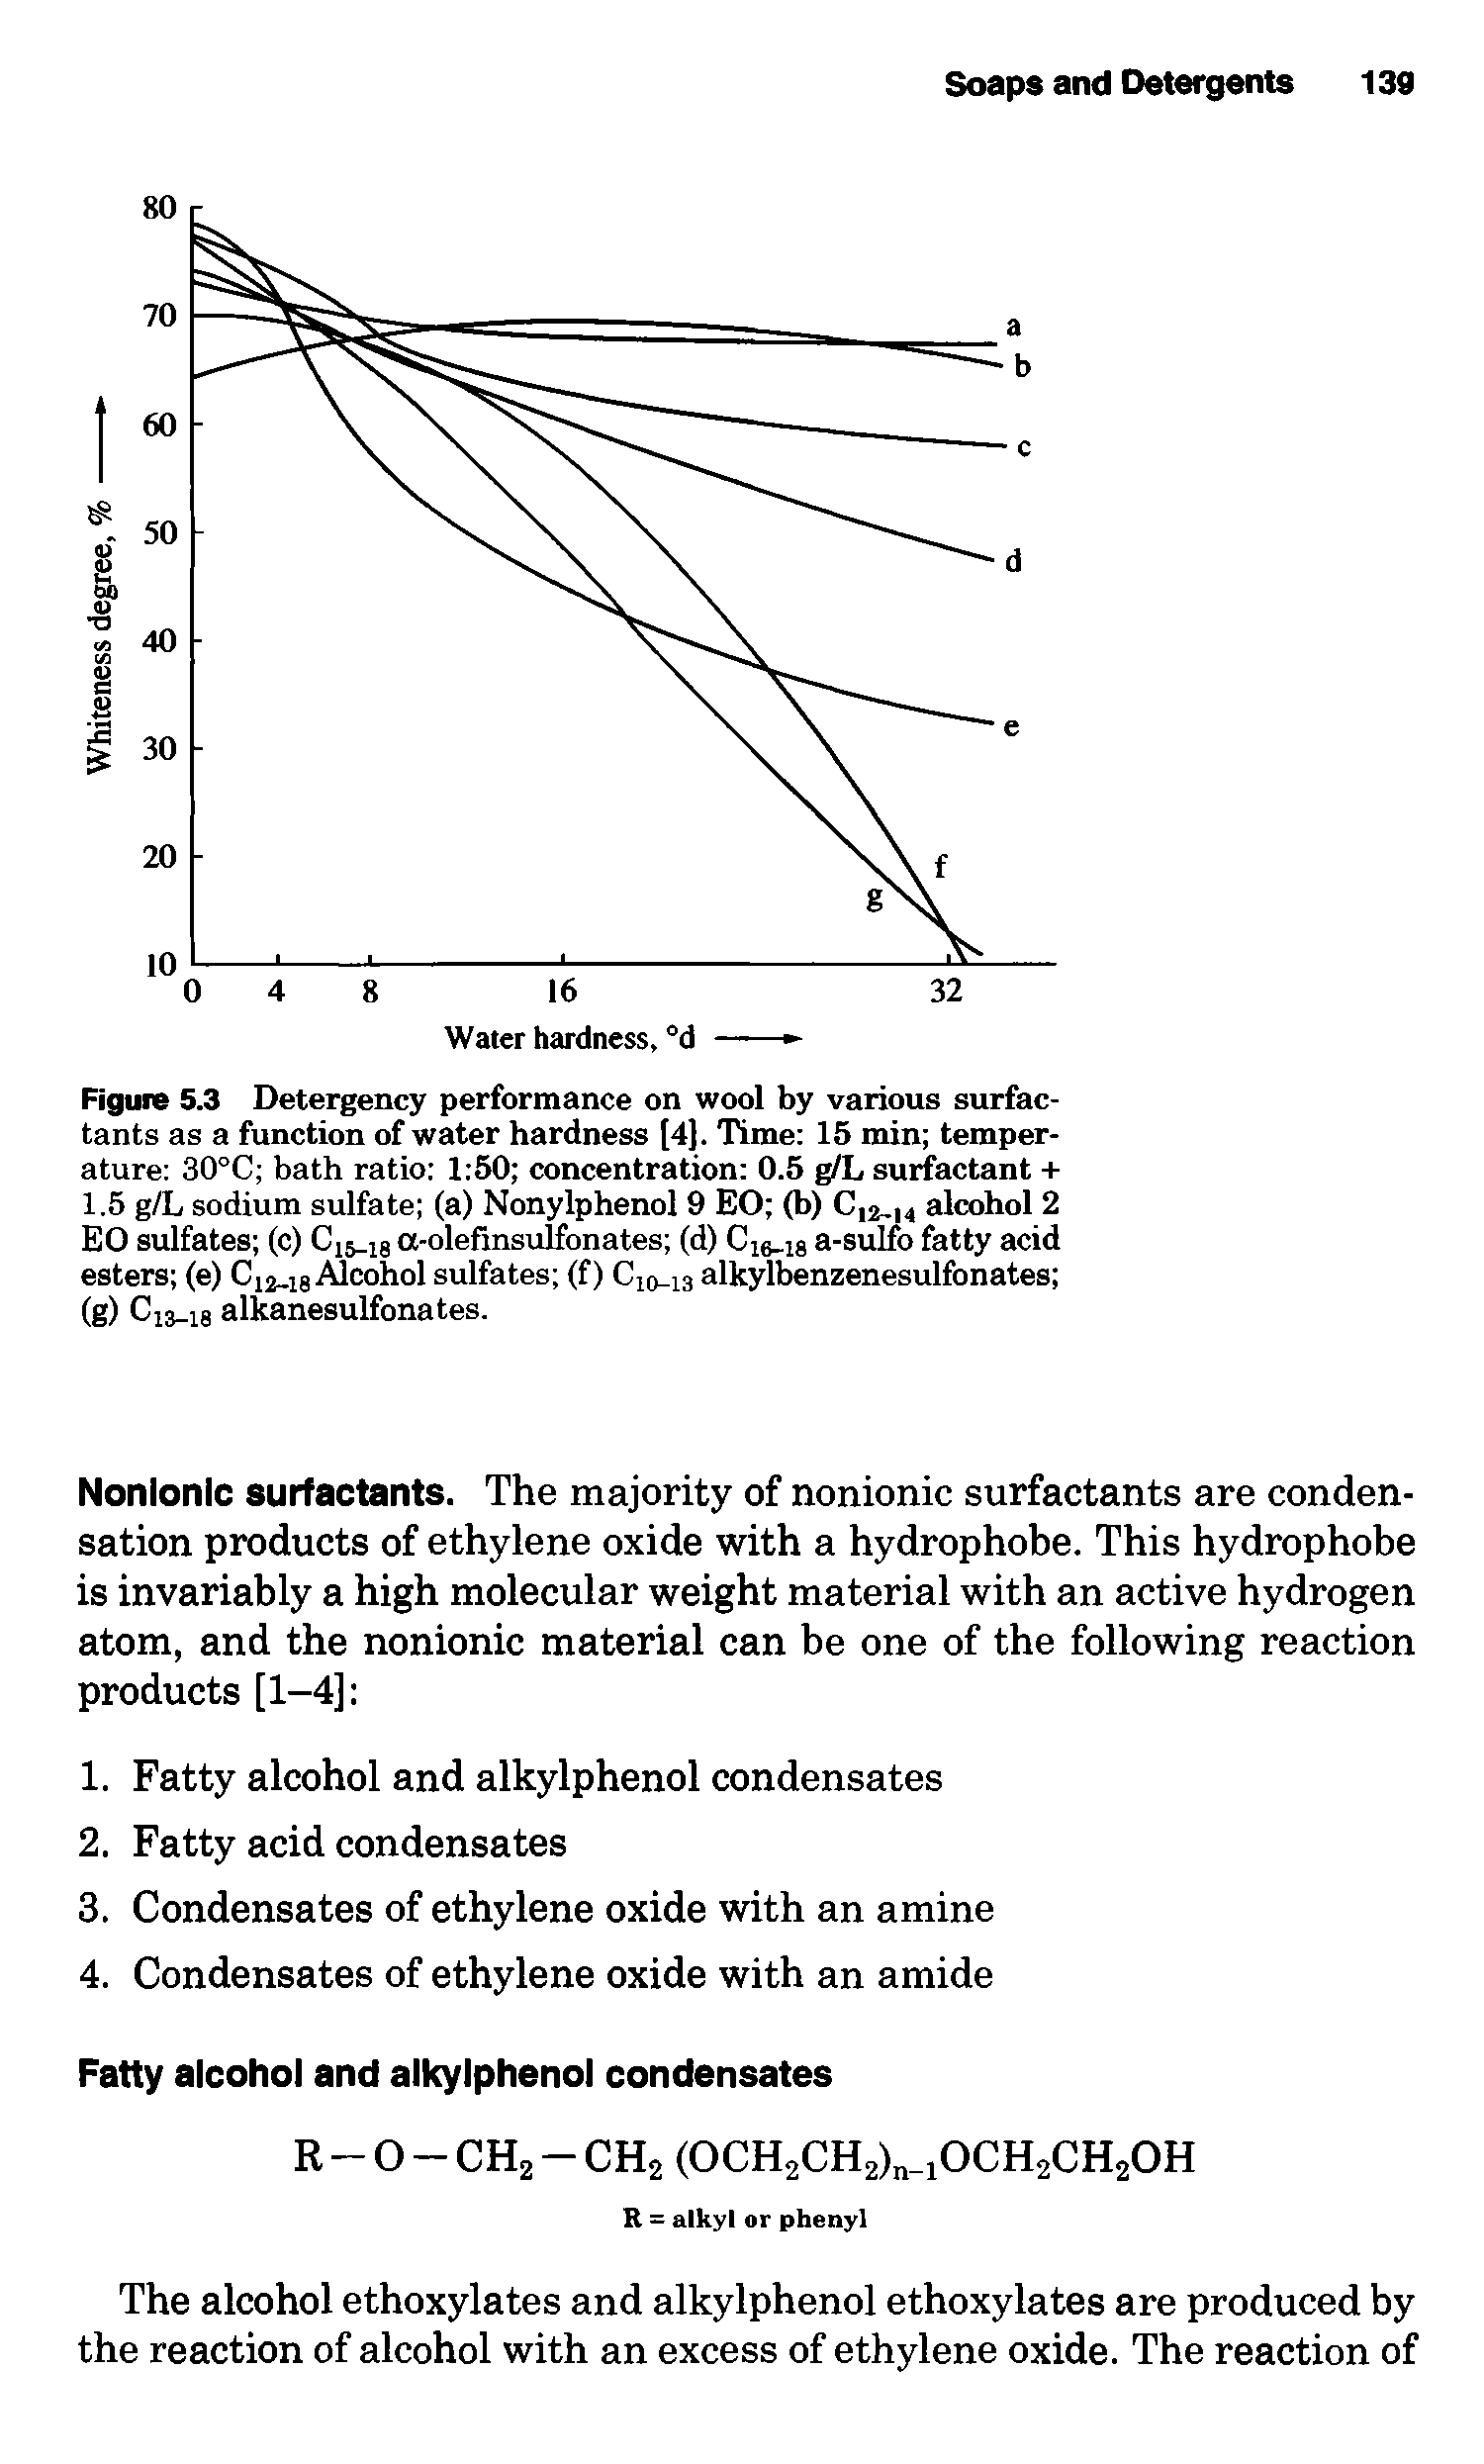 Figure 5.3 Detergency performance on wool by various surfactants as a function of water hardness [4]. Time 15 min temperature 30°C bath ratio 1 50 concentration 0.5 g/L surfactant + 1.5 g/L sodium sulfate (a) Nonylphenol 9 EO (b) C,2, 4 alcohol 2 EO sulfates (c) Ci5 ig a-olefmsulfonates (d) Ci6 i8 a-sulfo fatty acid esters (e) Ci2 ig Alcohol sulfates (f) Cio i3 alkylbenzenesulfonates (g) Ci3 i8 alkanesulfonates.